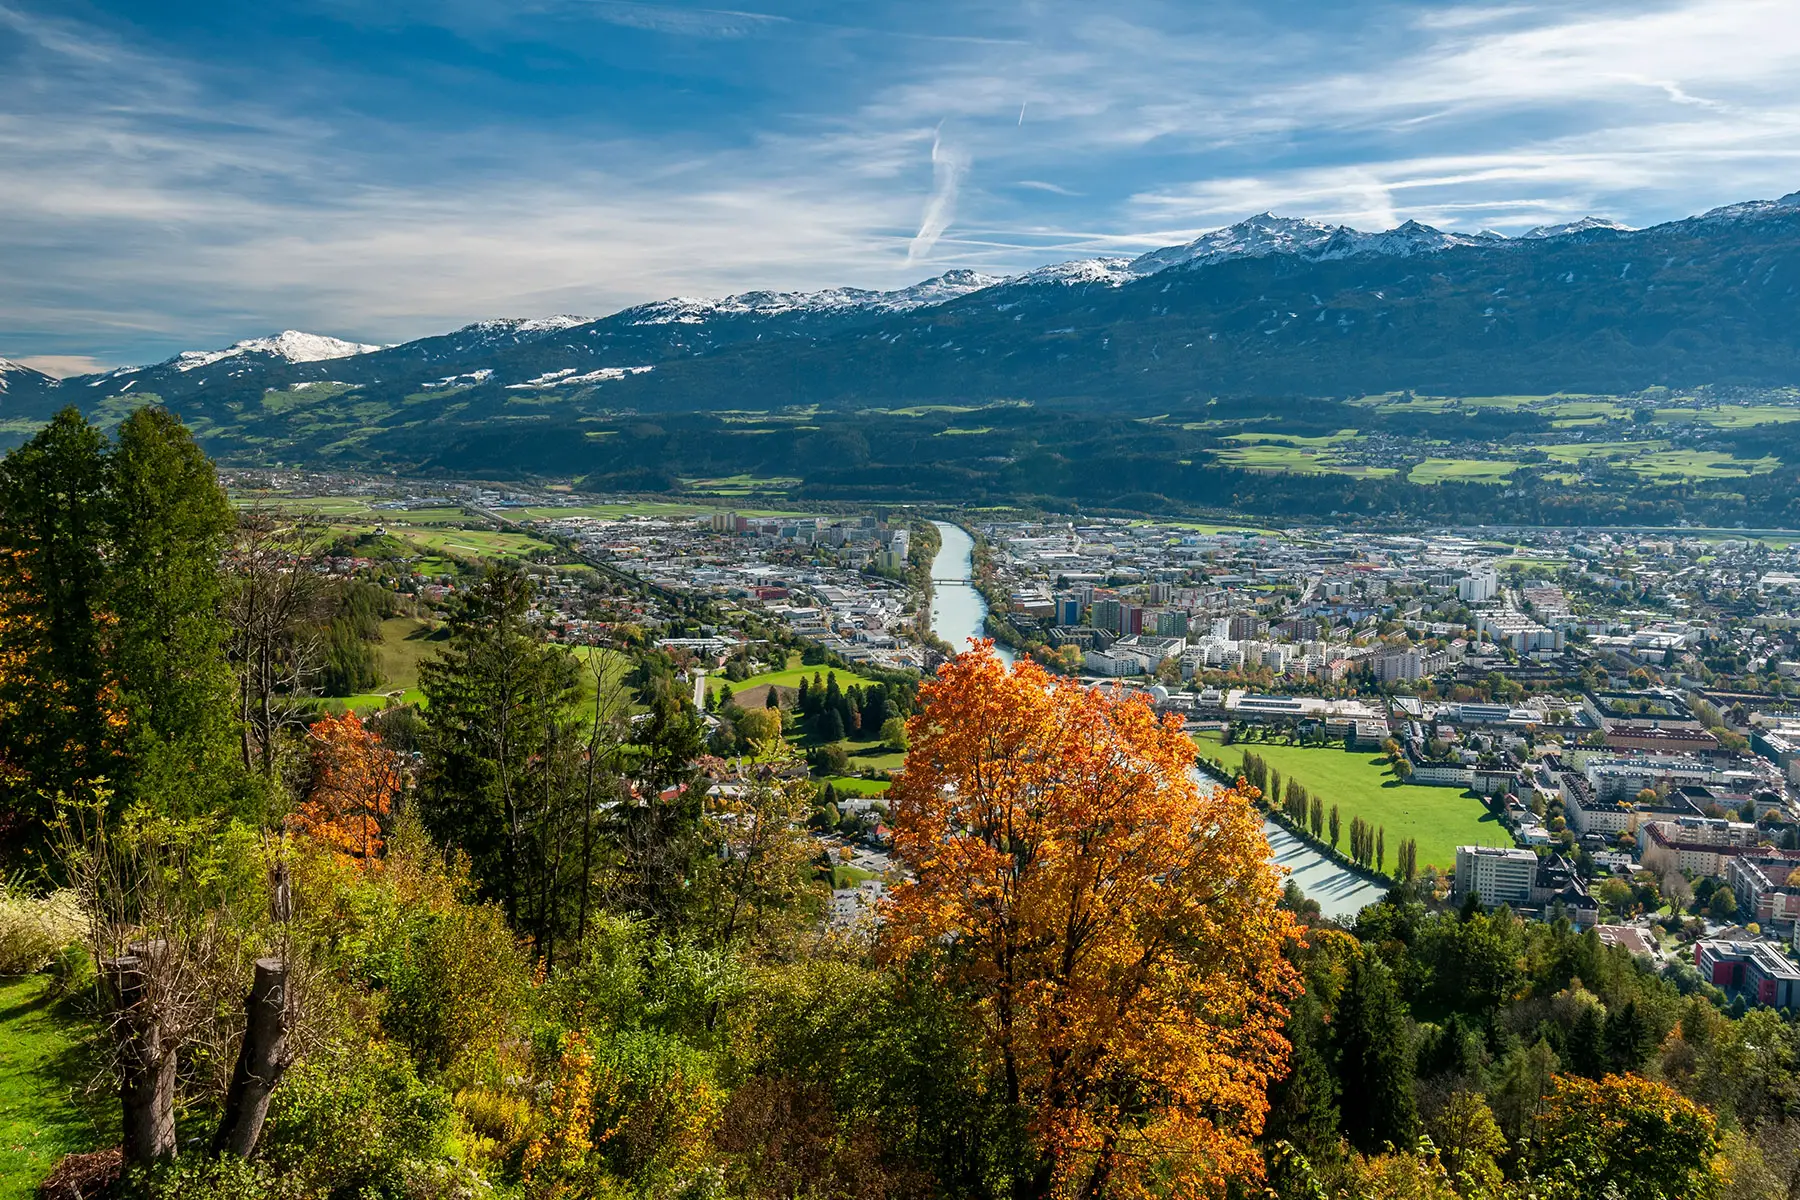 A view of Innsbruck from the nearby mountains